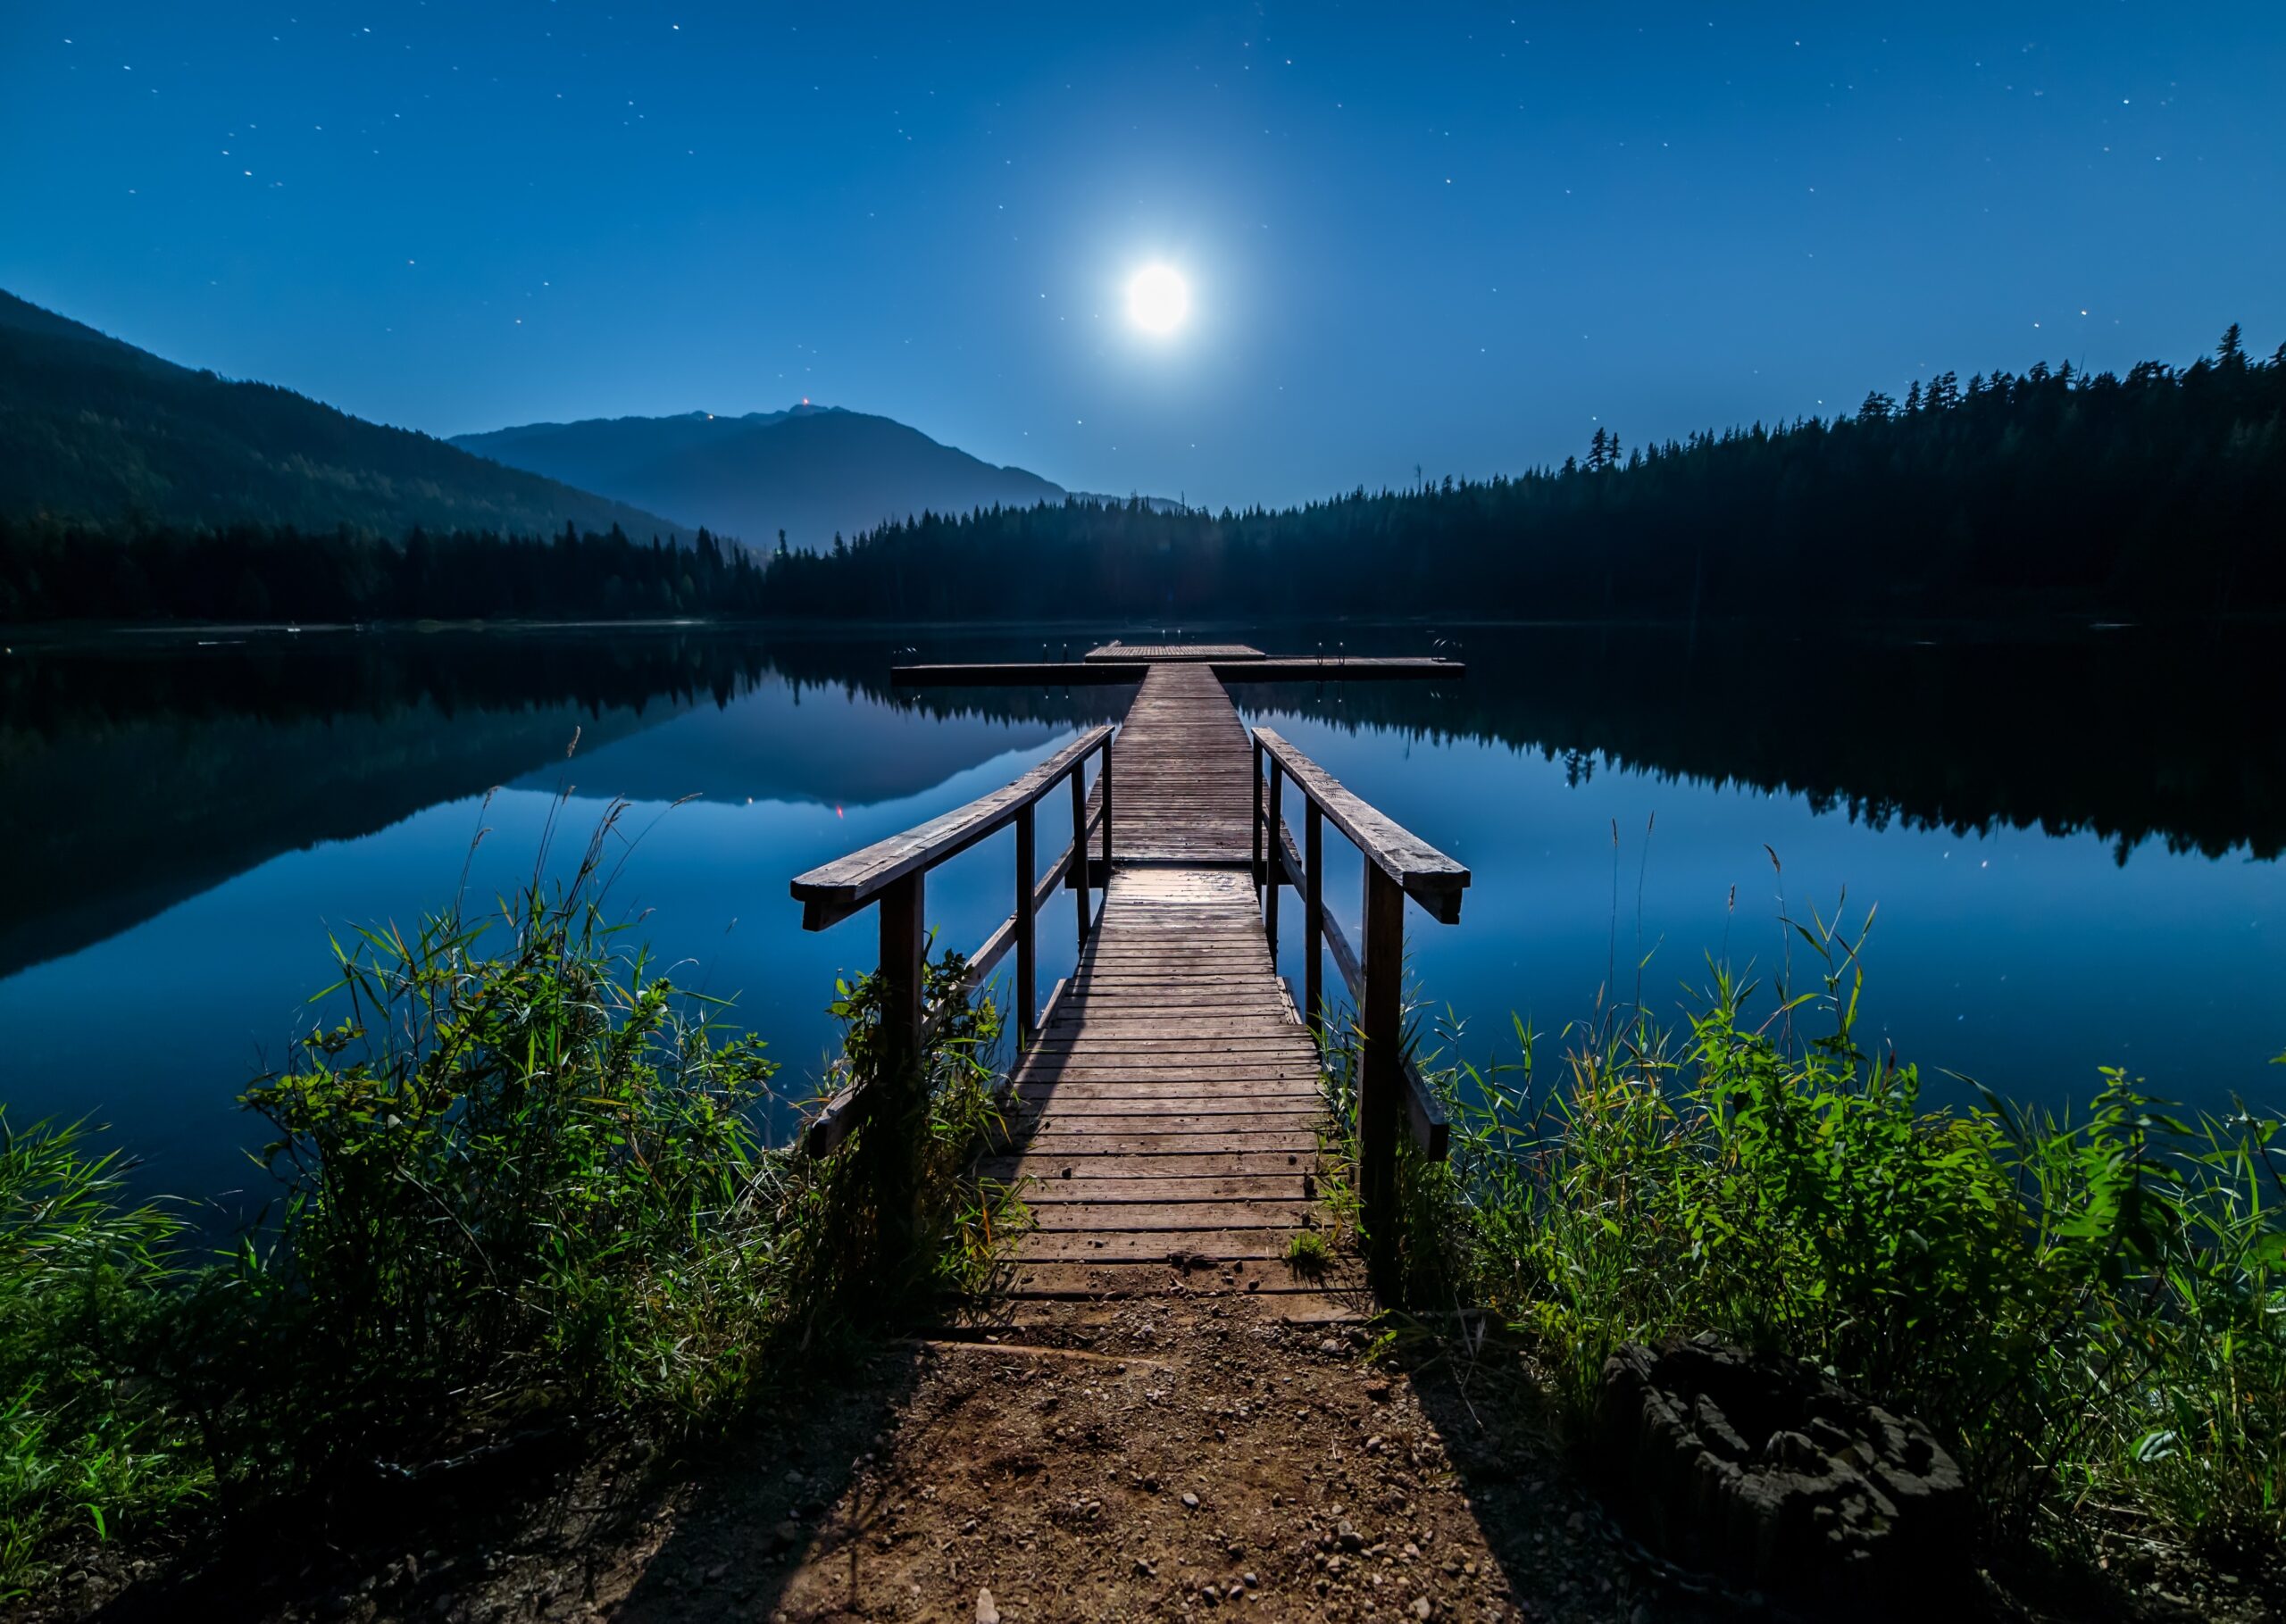 Body of water with a bridge in the mountains at night